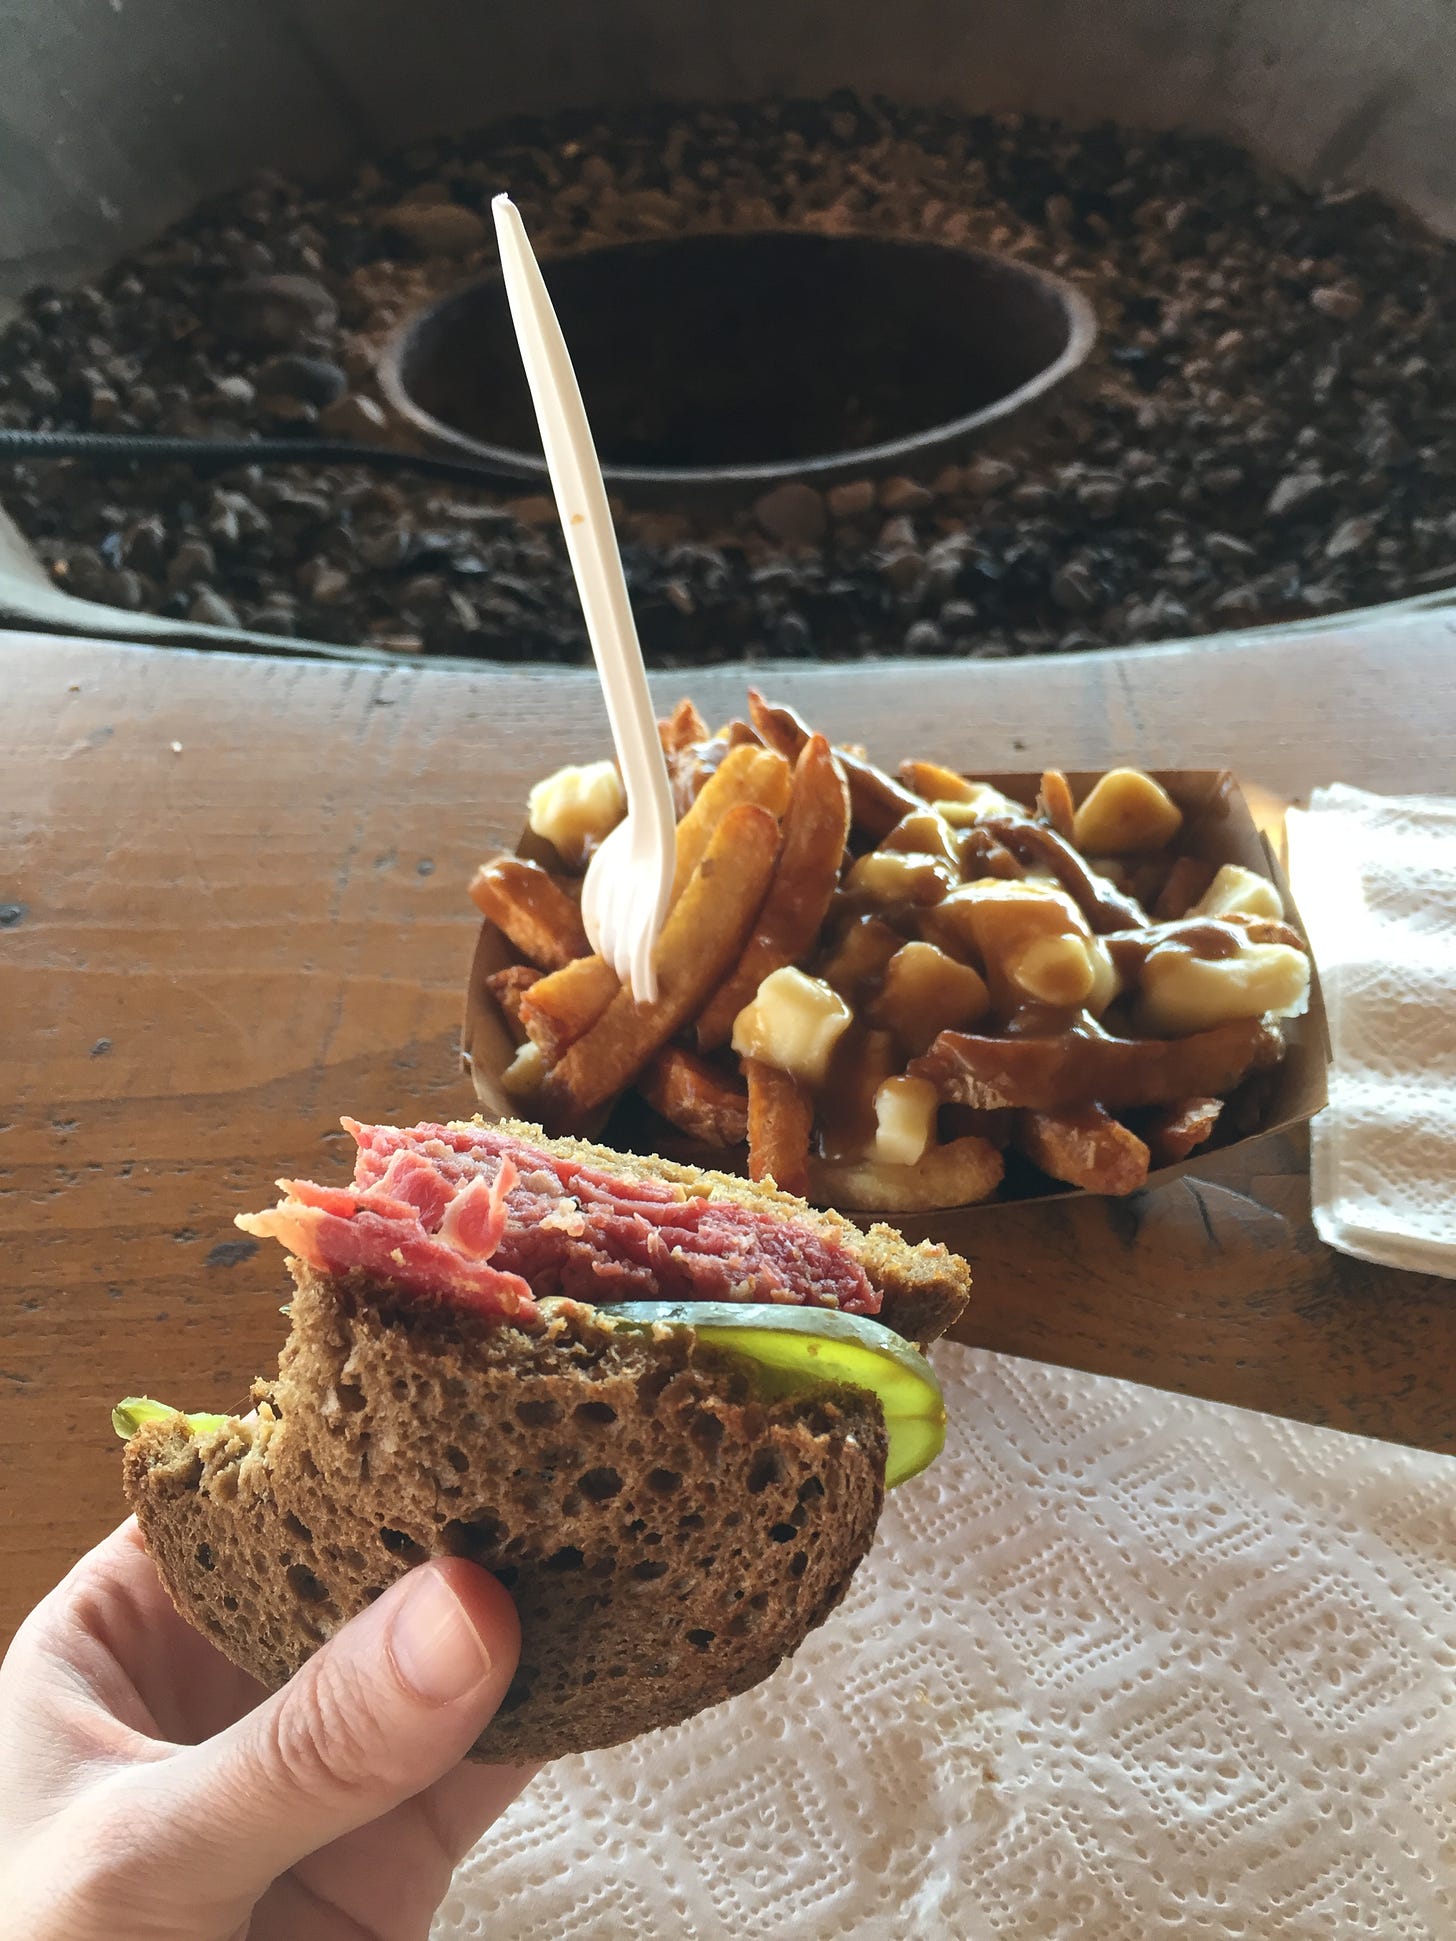 My hand holding a smoked meat sandwich half on rye with one bite out of it. Behind it on a wooden table is a rectangular paper dish of poutine with a white fork sticking out. In the background is a fire pit, unlit.